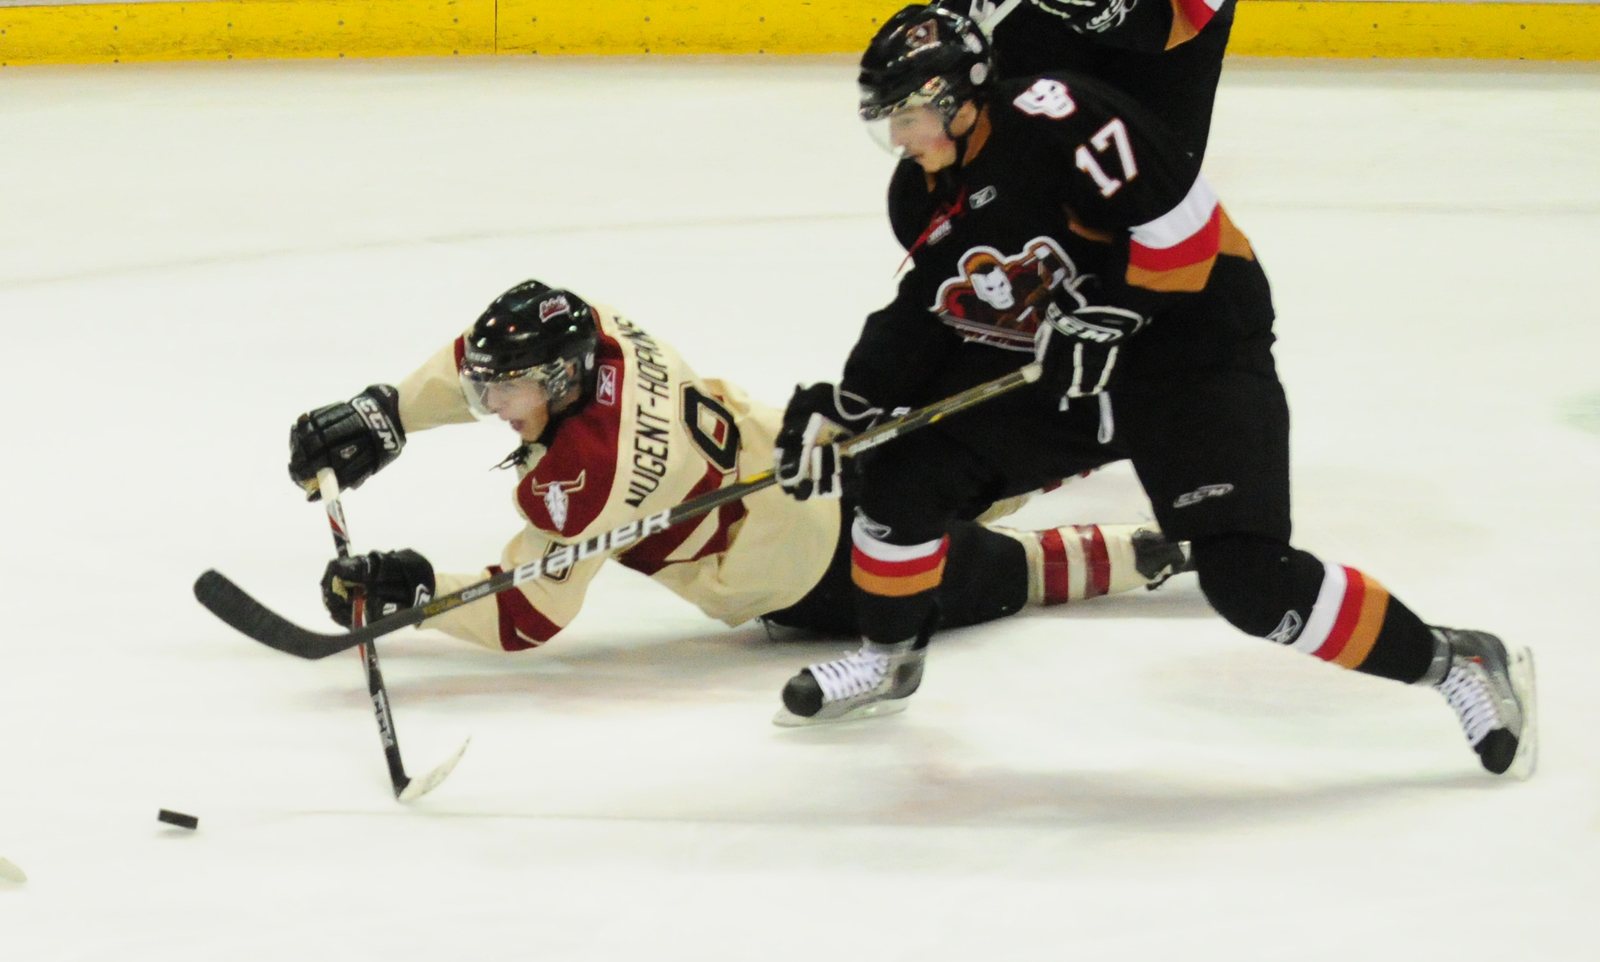 DIVE- Red Deer Rebel Ryan Nugent-Hopkins dives for the puck during WHL action Friday night against the Calgary Hitmen. The Rebels won 4-1.